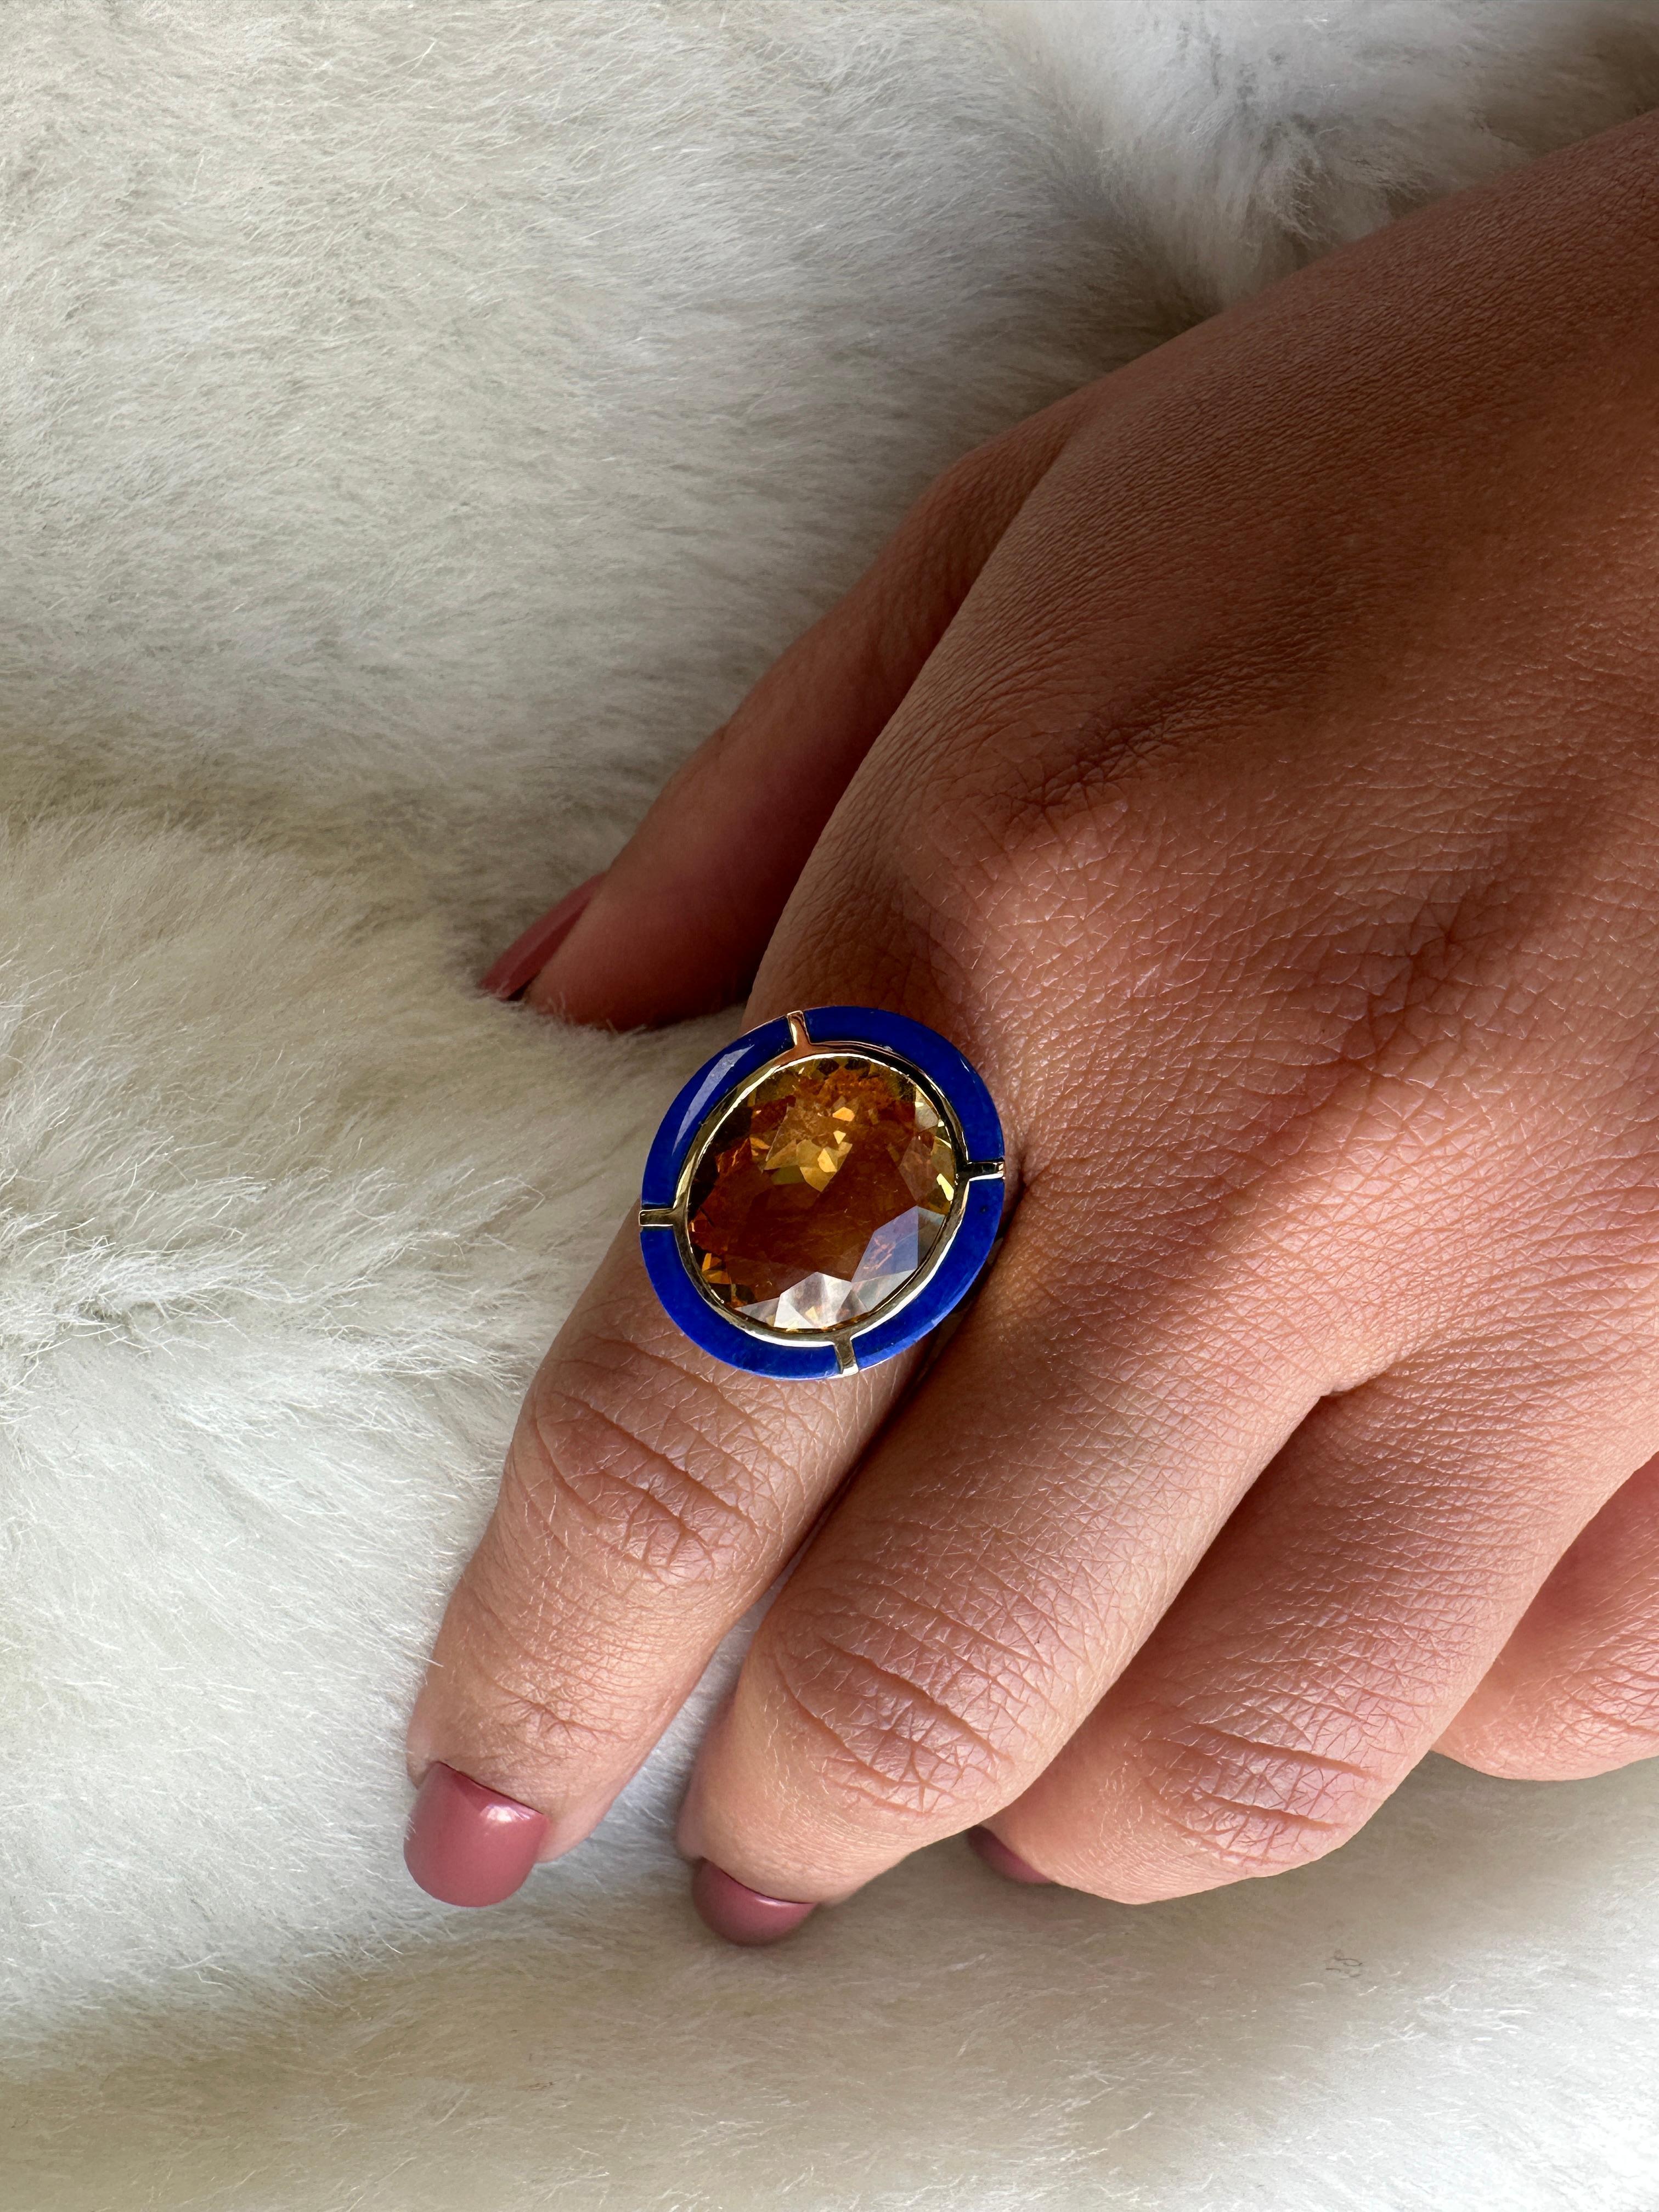 The Citrine & Lapis Lazuli Oval Ring in 18K Yellow Gold is a stunning piece of jewelry from the 'Melange' Collection. The ring features a beautiful oval-shaped citrine stone set in the center, surrounded by a halo of deep blue lapis lazuli stones.